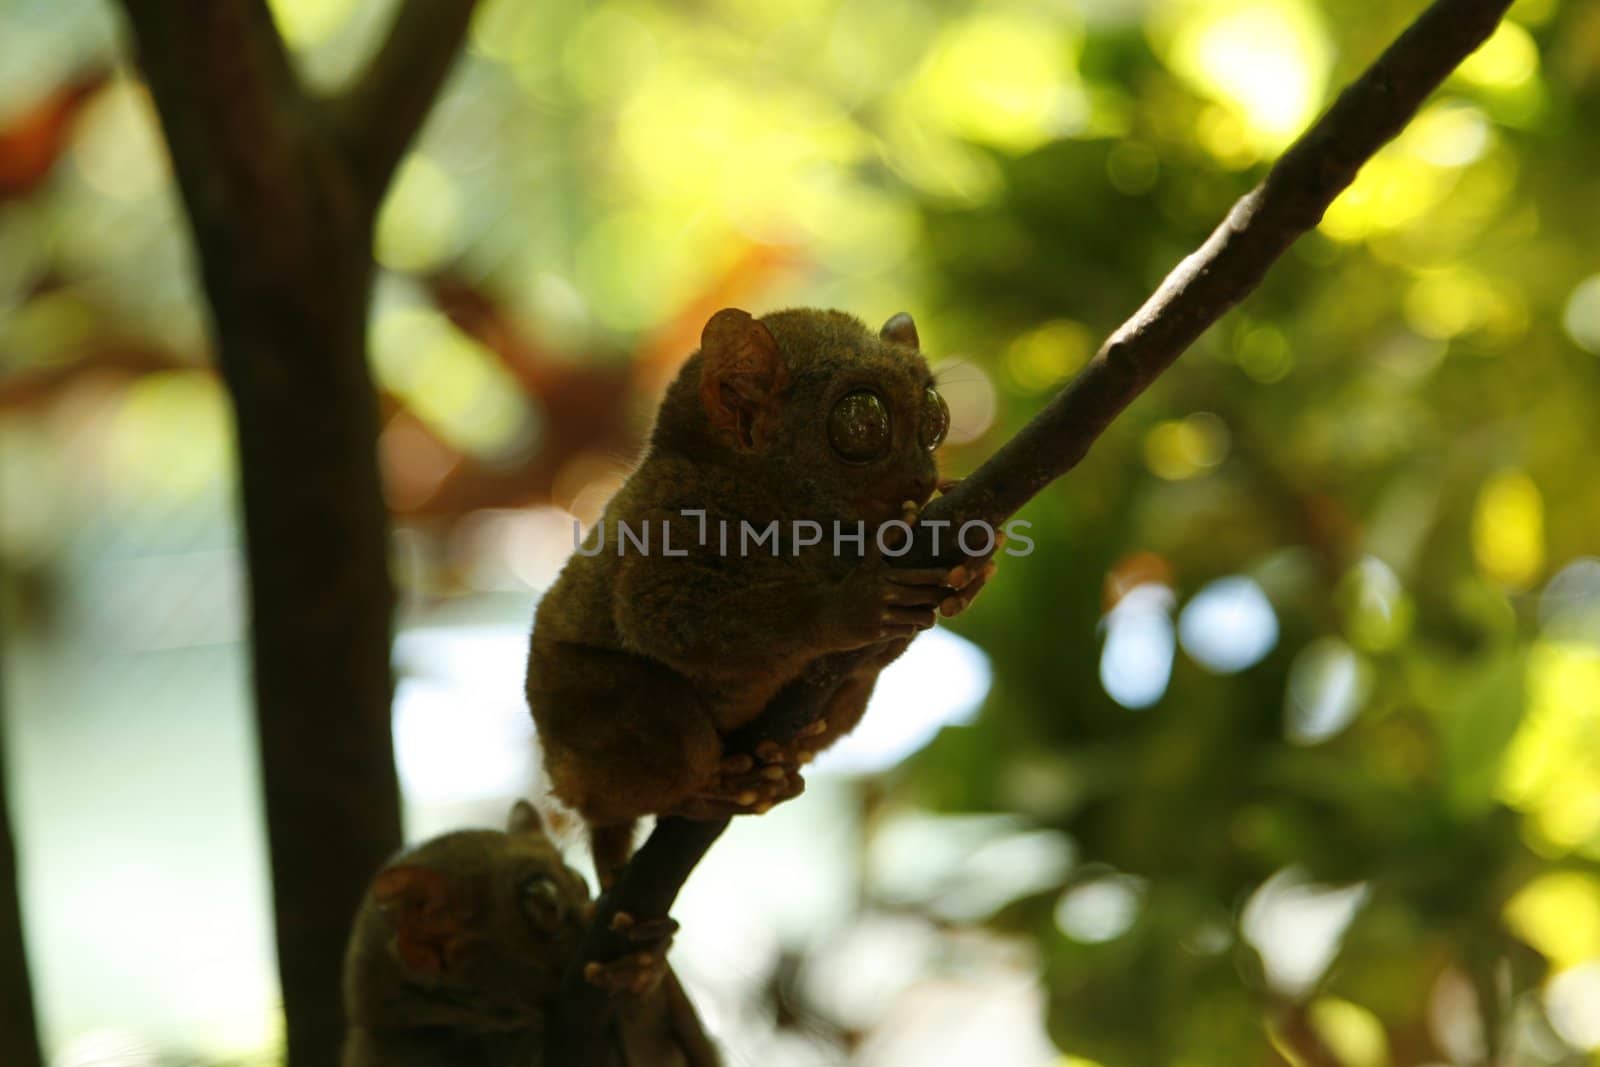 Monkey called Tarsier they say on of the Star wars figur was inspired by it !